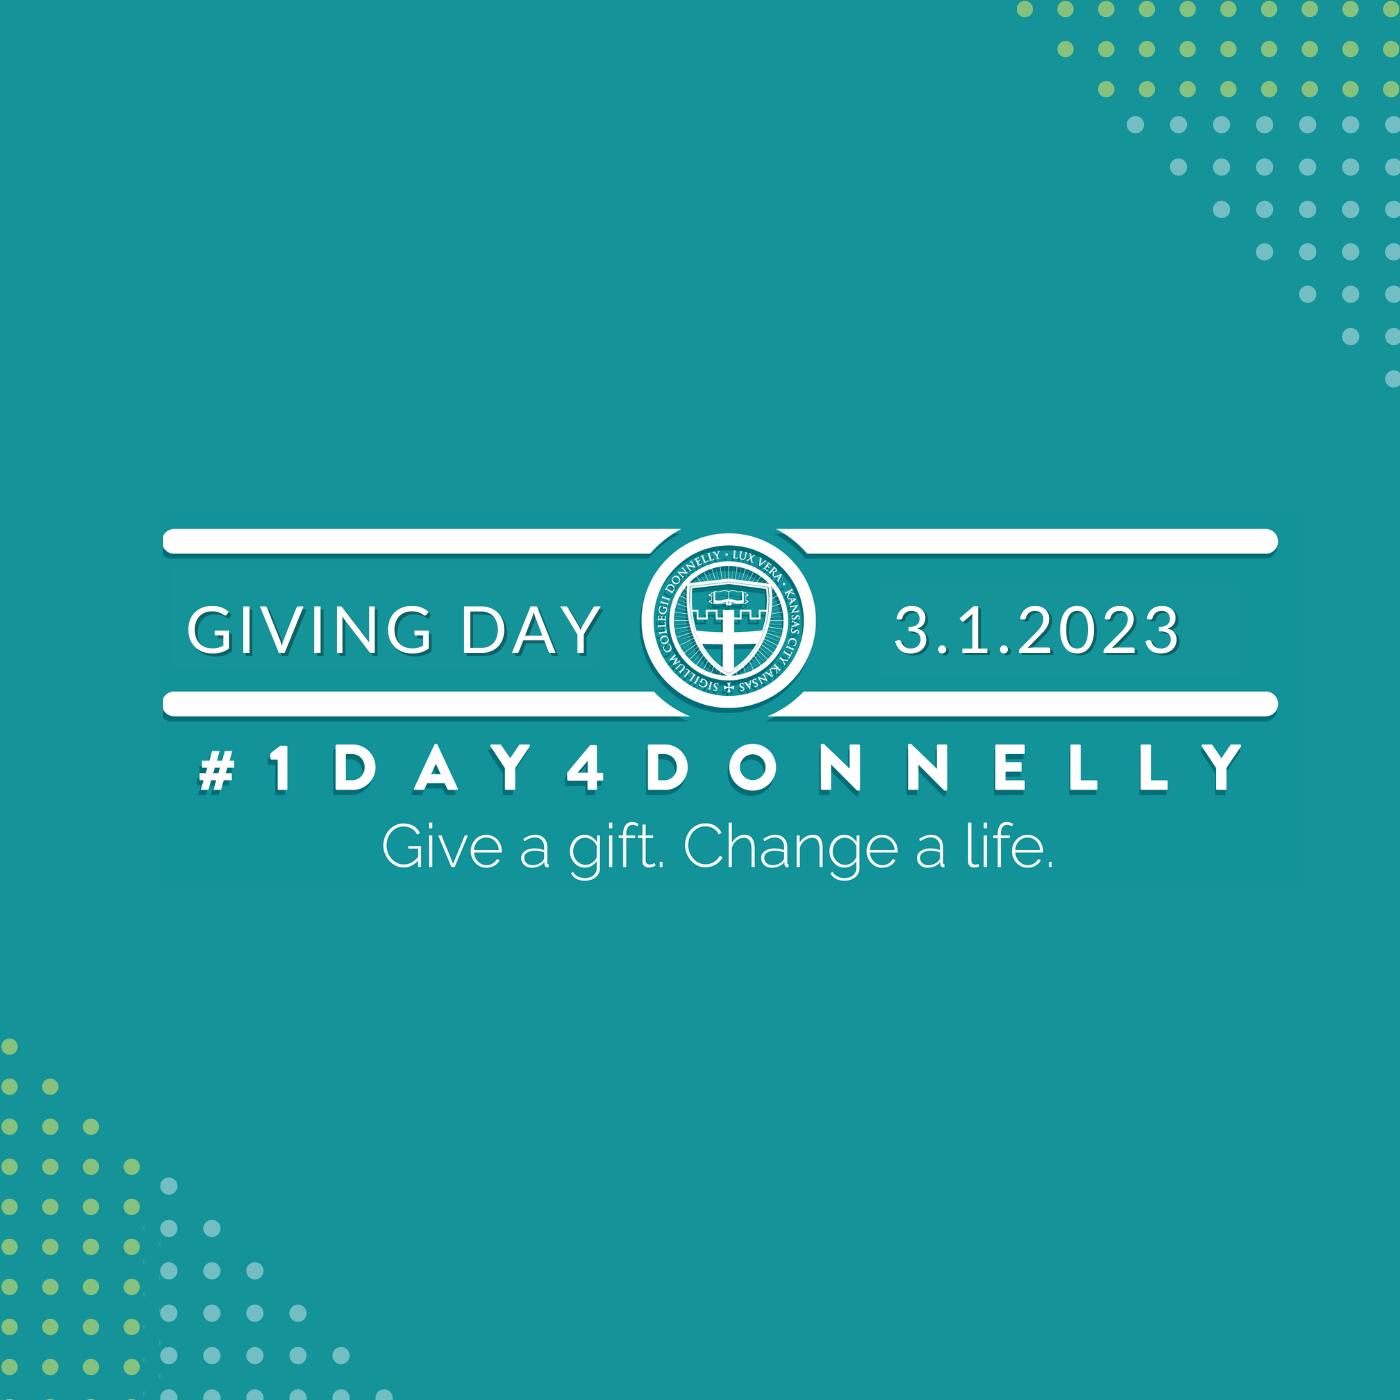 Giving Day March 1, 2023